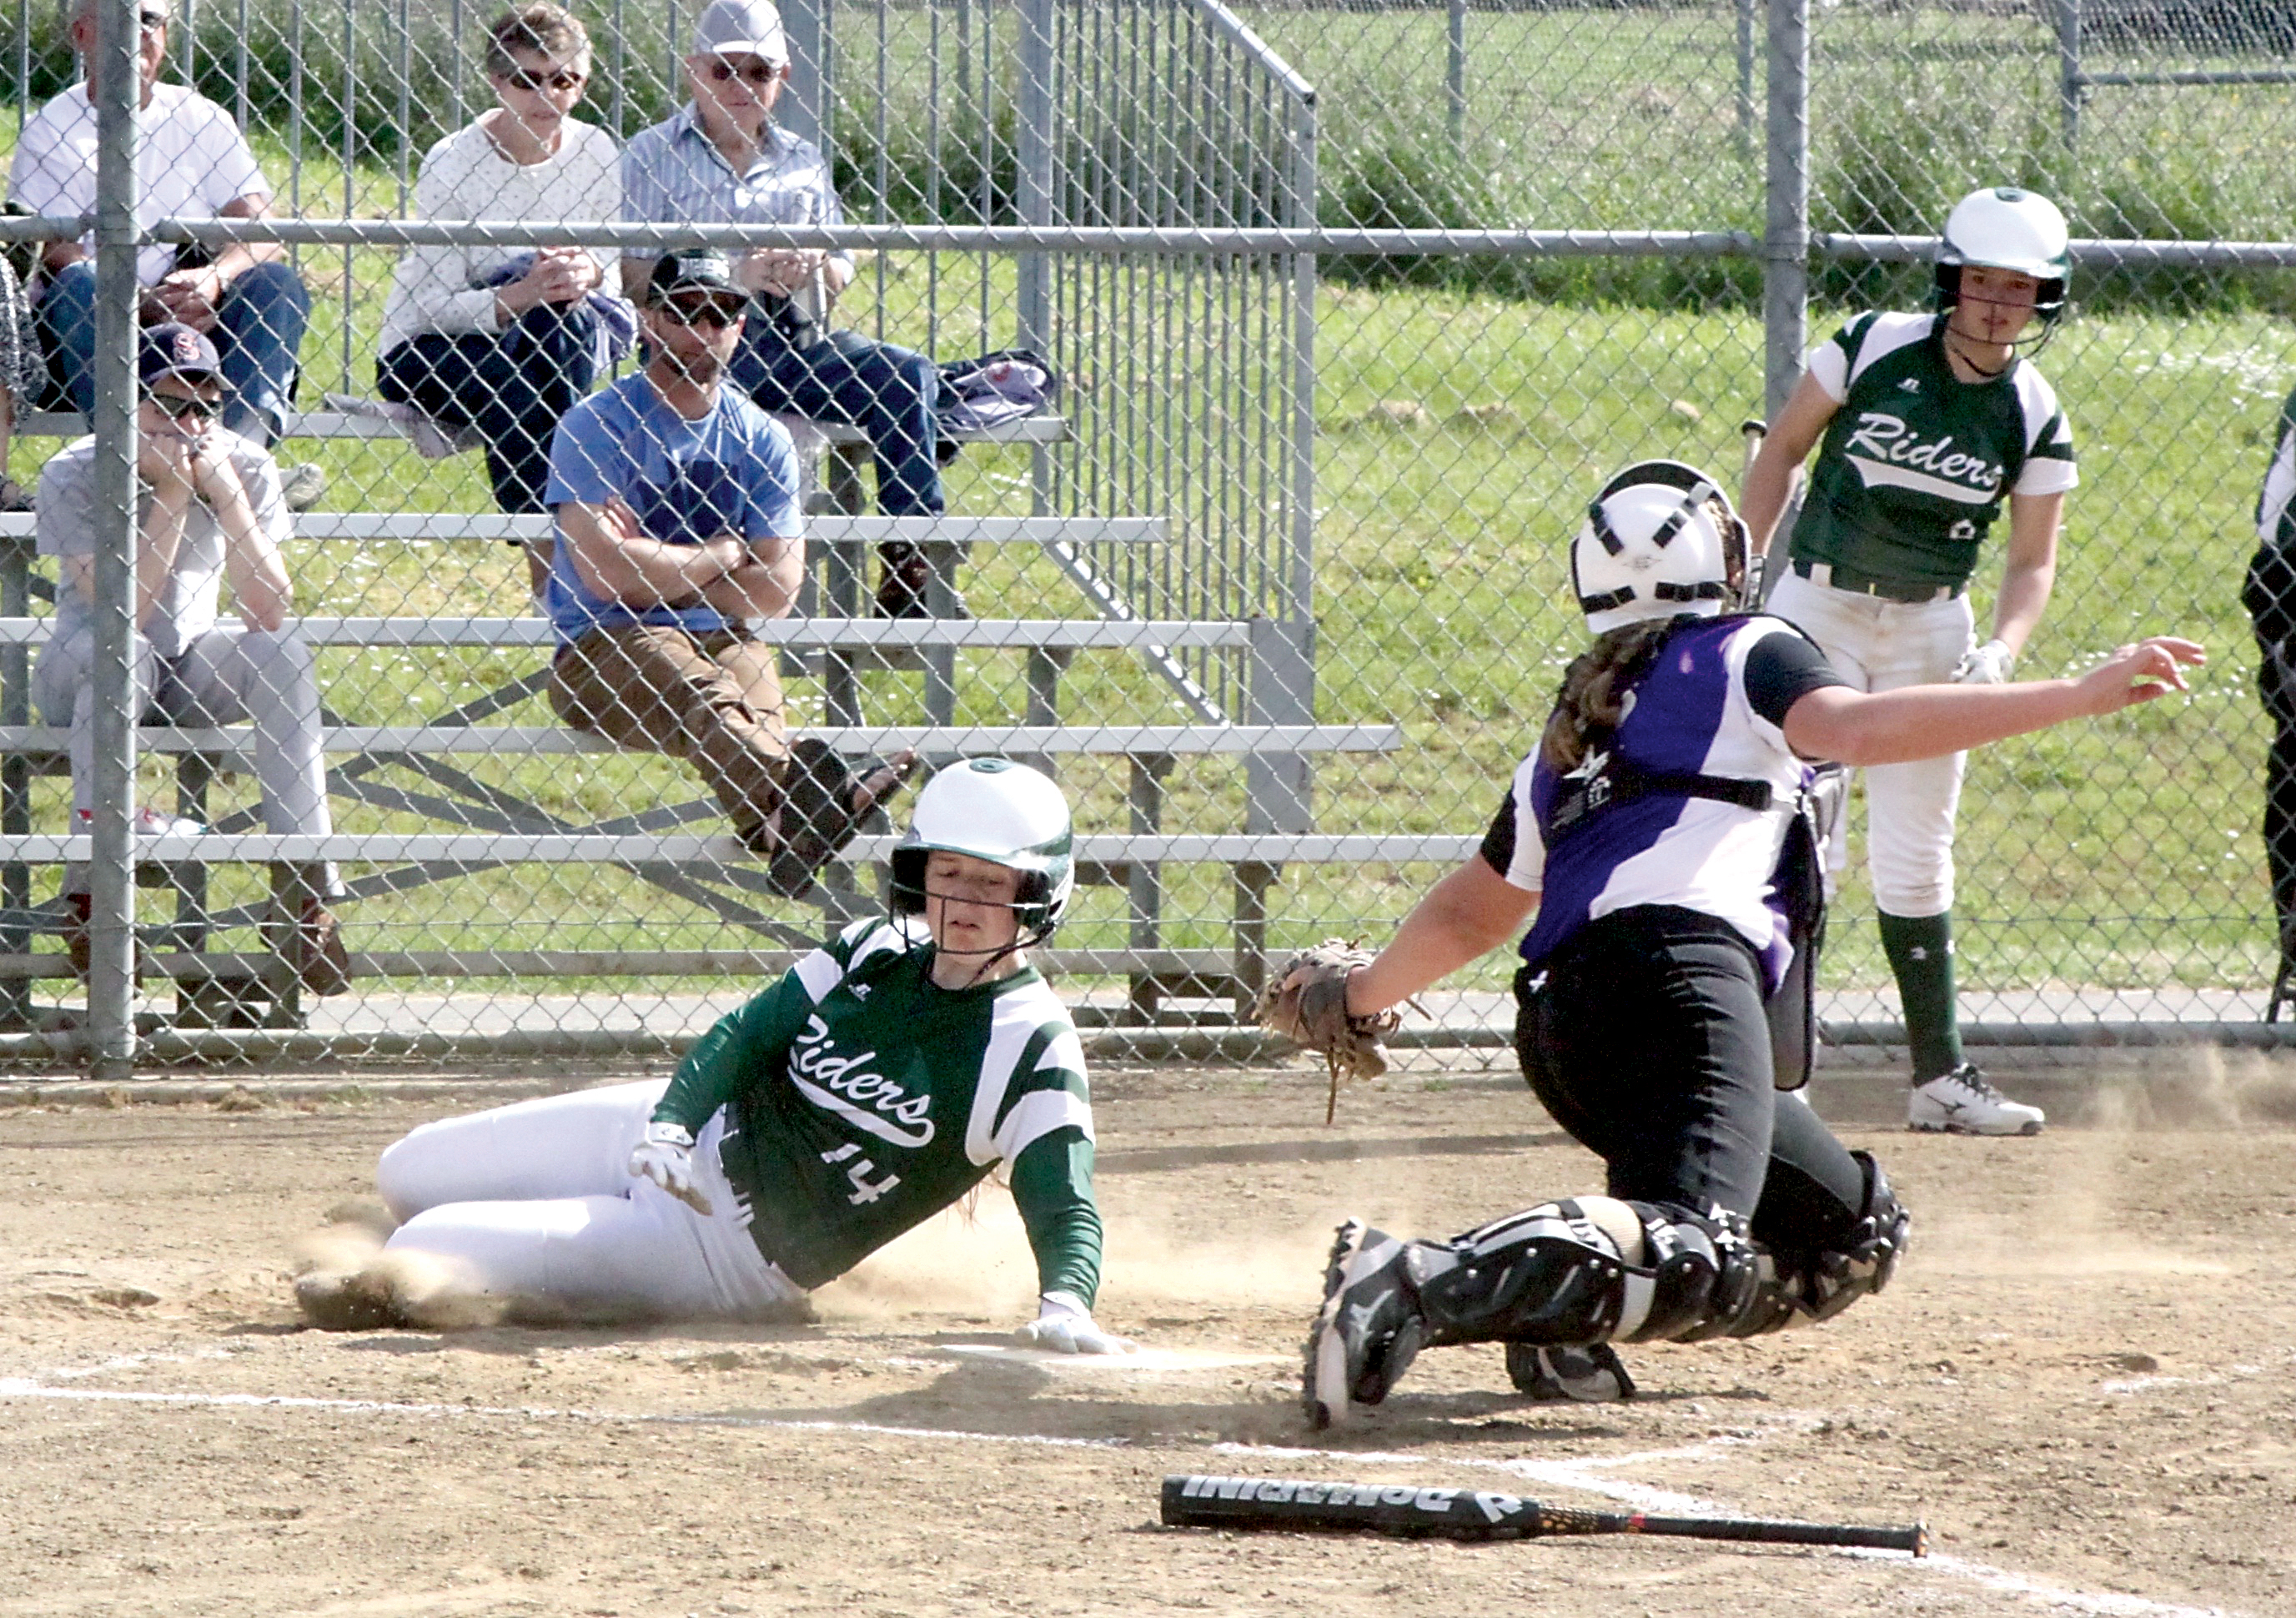 Lauren Lunt slides safely into home plate for Port Angeles' seventh run of the game as North Kitsap catcher Lamara Villard tries to apply a tag. Kylee Reid of Port Angeles watches from the background. (Dave Logan/for Peninsula Daily News)